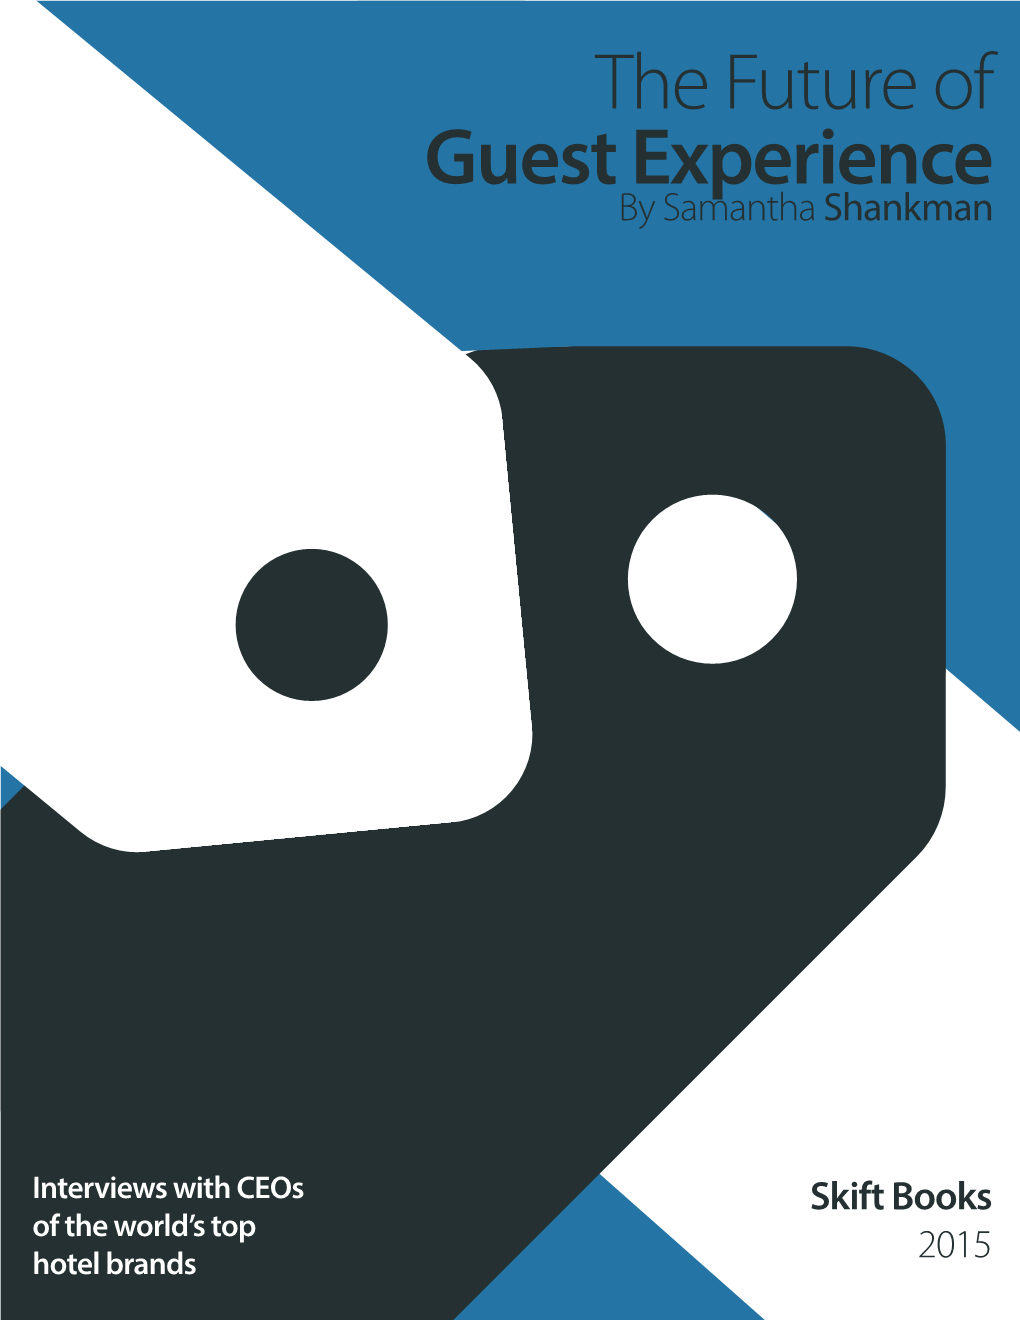 The Future of Guest Experience by Samantha Shankman